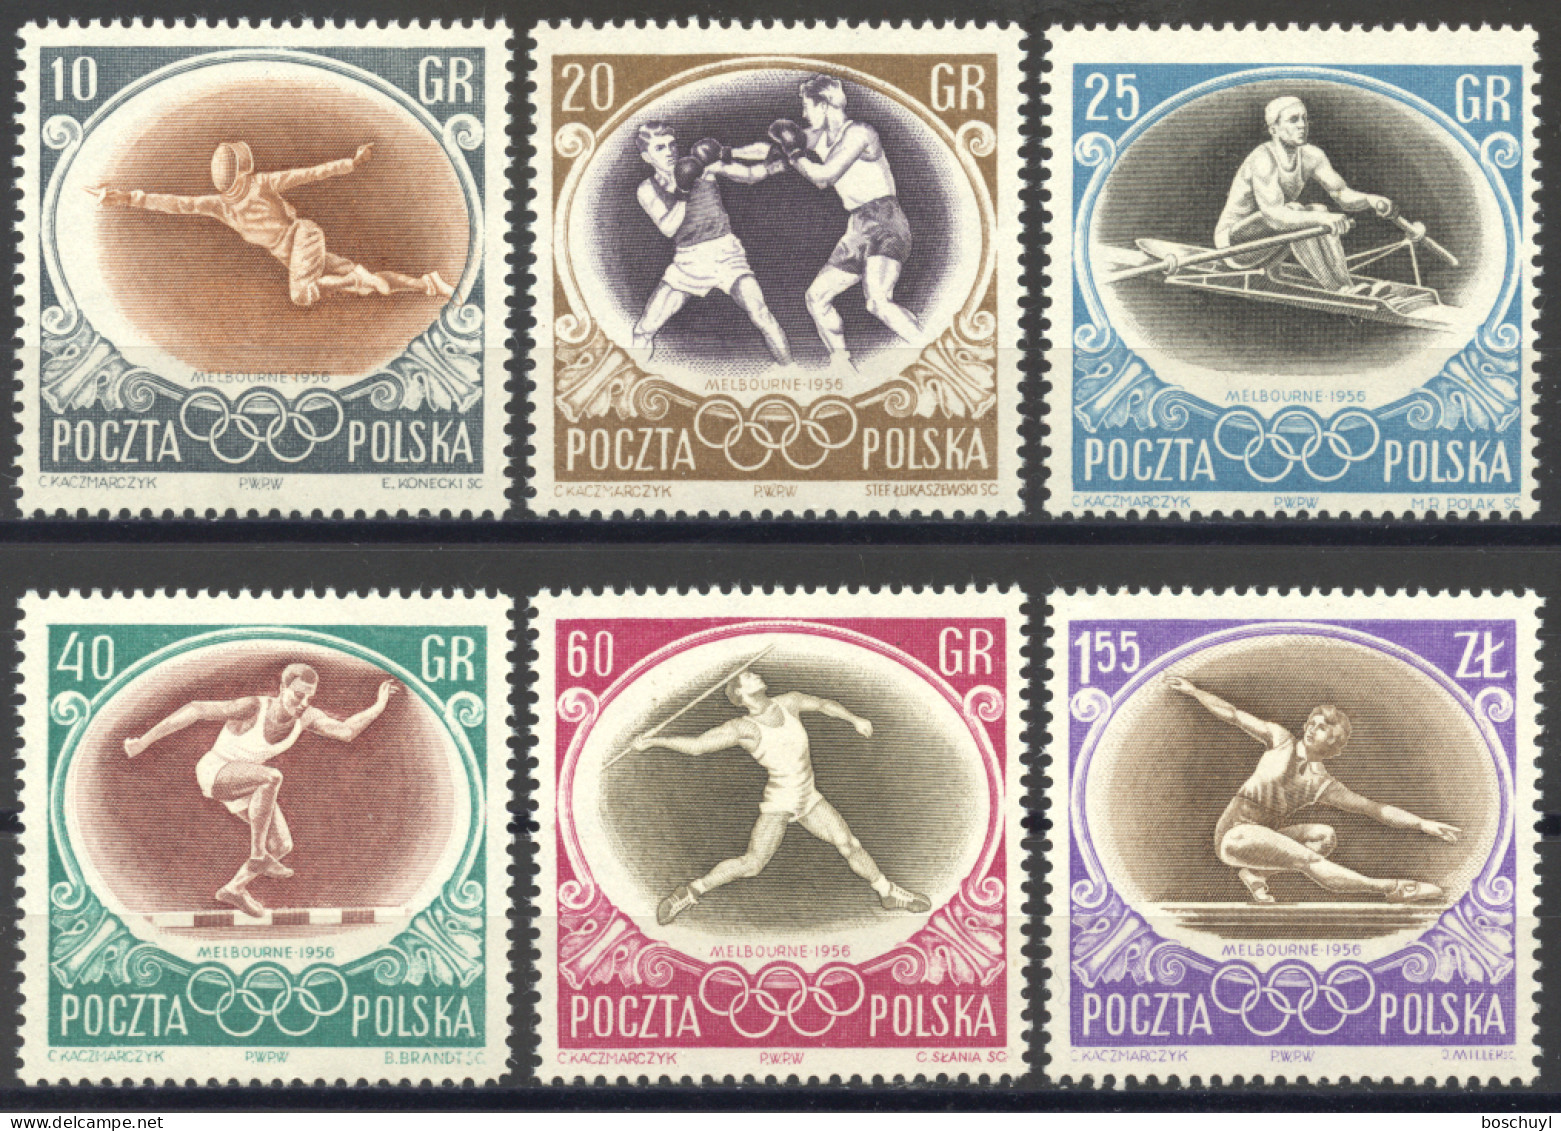 Poland, 1956, Olympic Summer Games Melbourne, Sports, MNH, Michel 984-989 - Unused Stamps